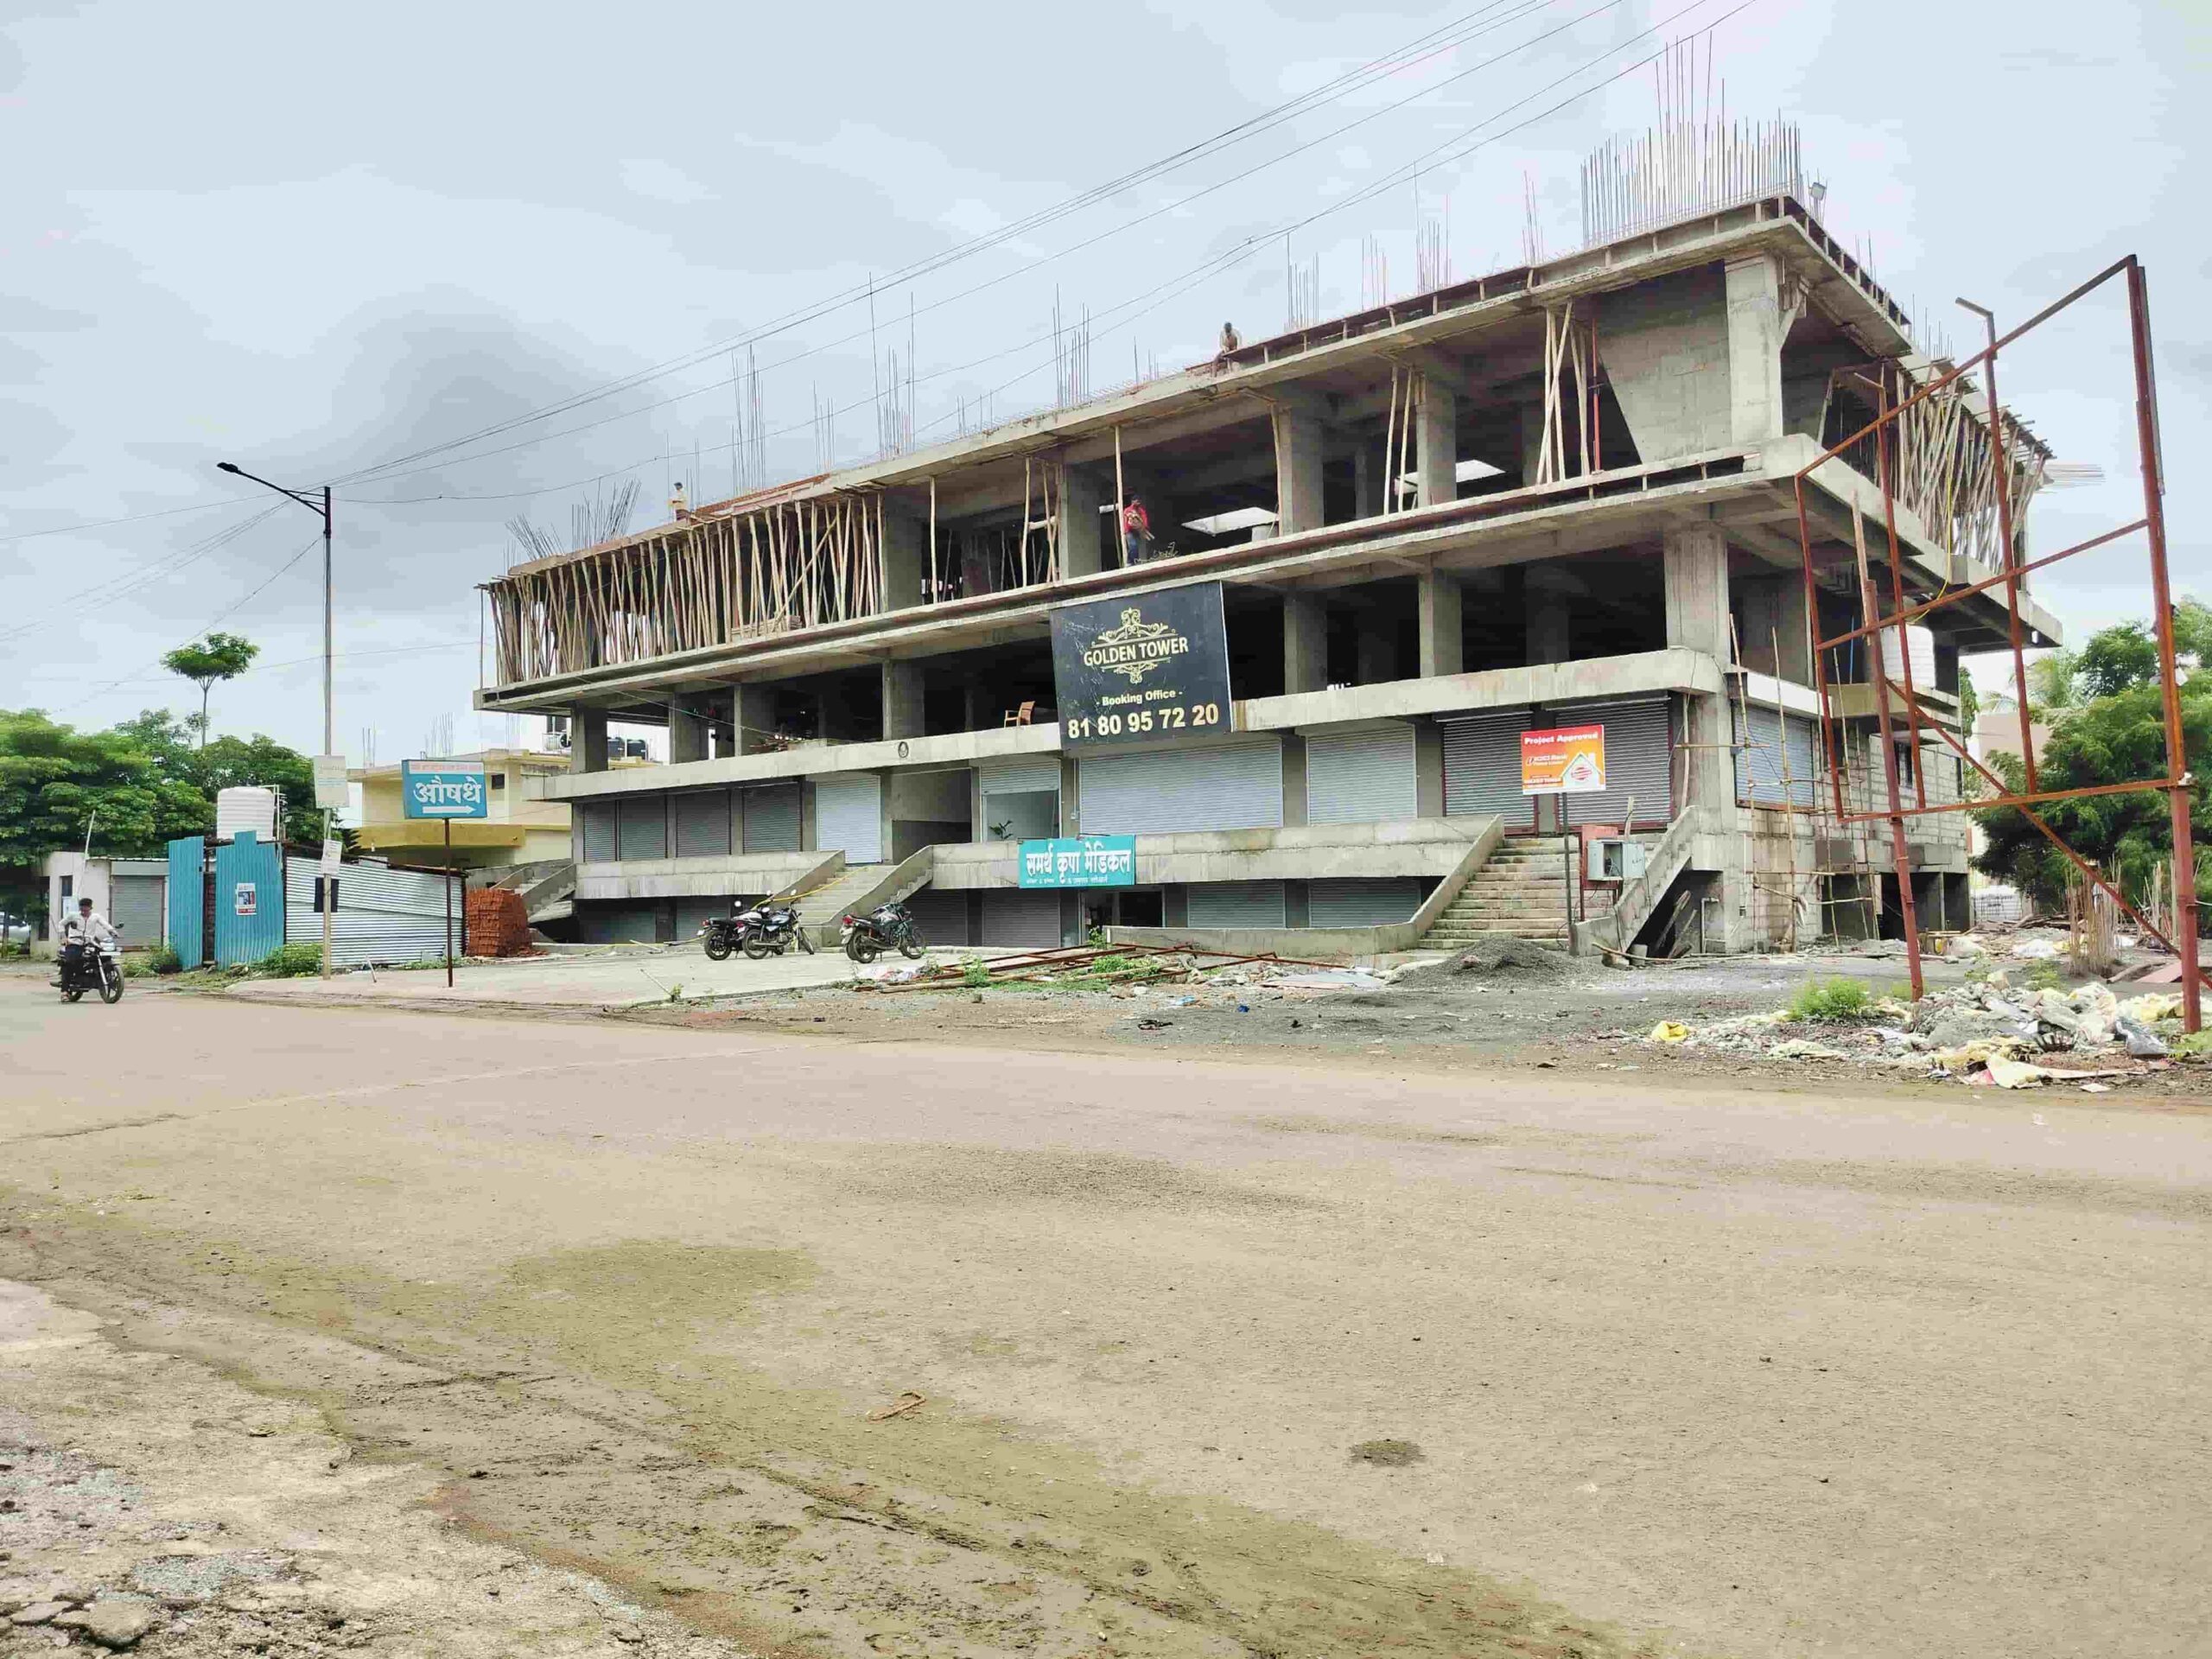 This image shows a building under construction on the side of a road. The building is made of concrete and steel, and it is surrounded by scaffolding. There are several workers on the site, and they are busy working on the building. The overall atmosphere is busy and productive.